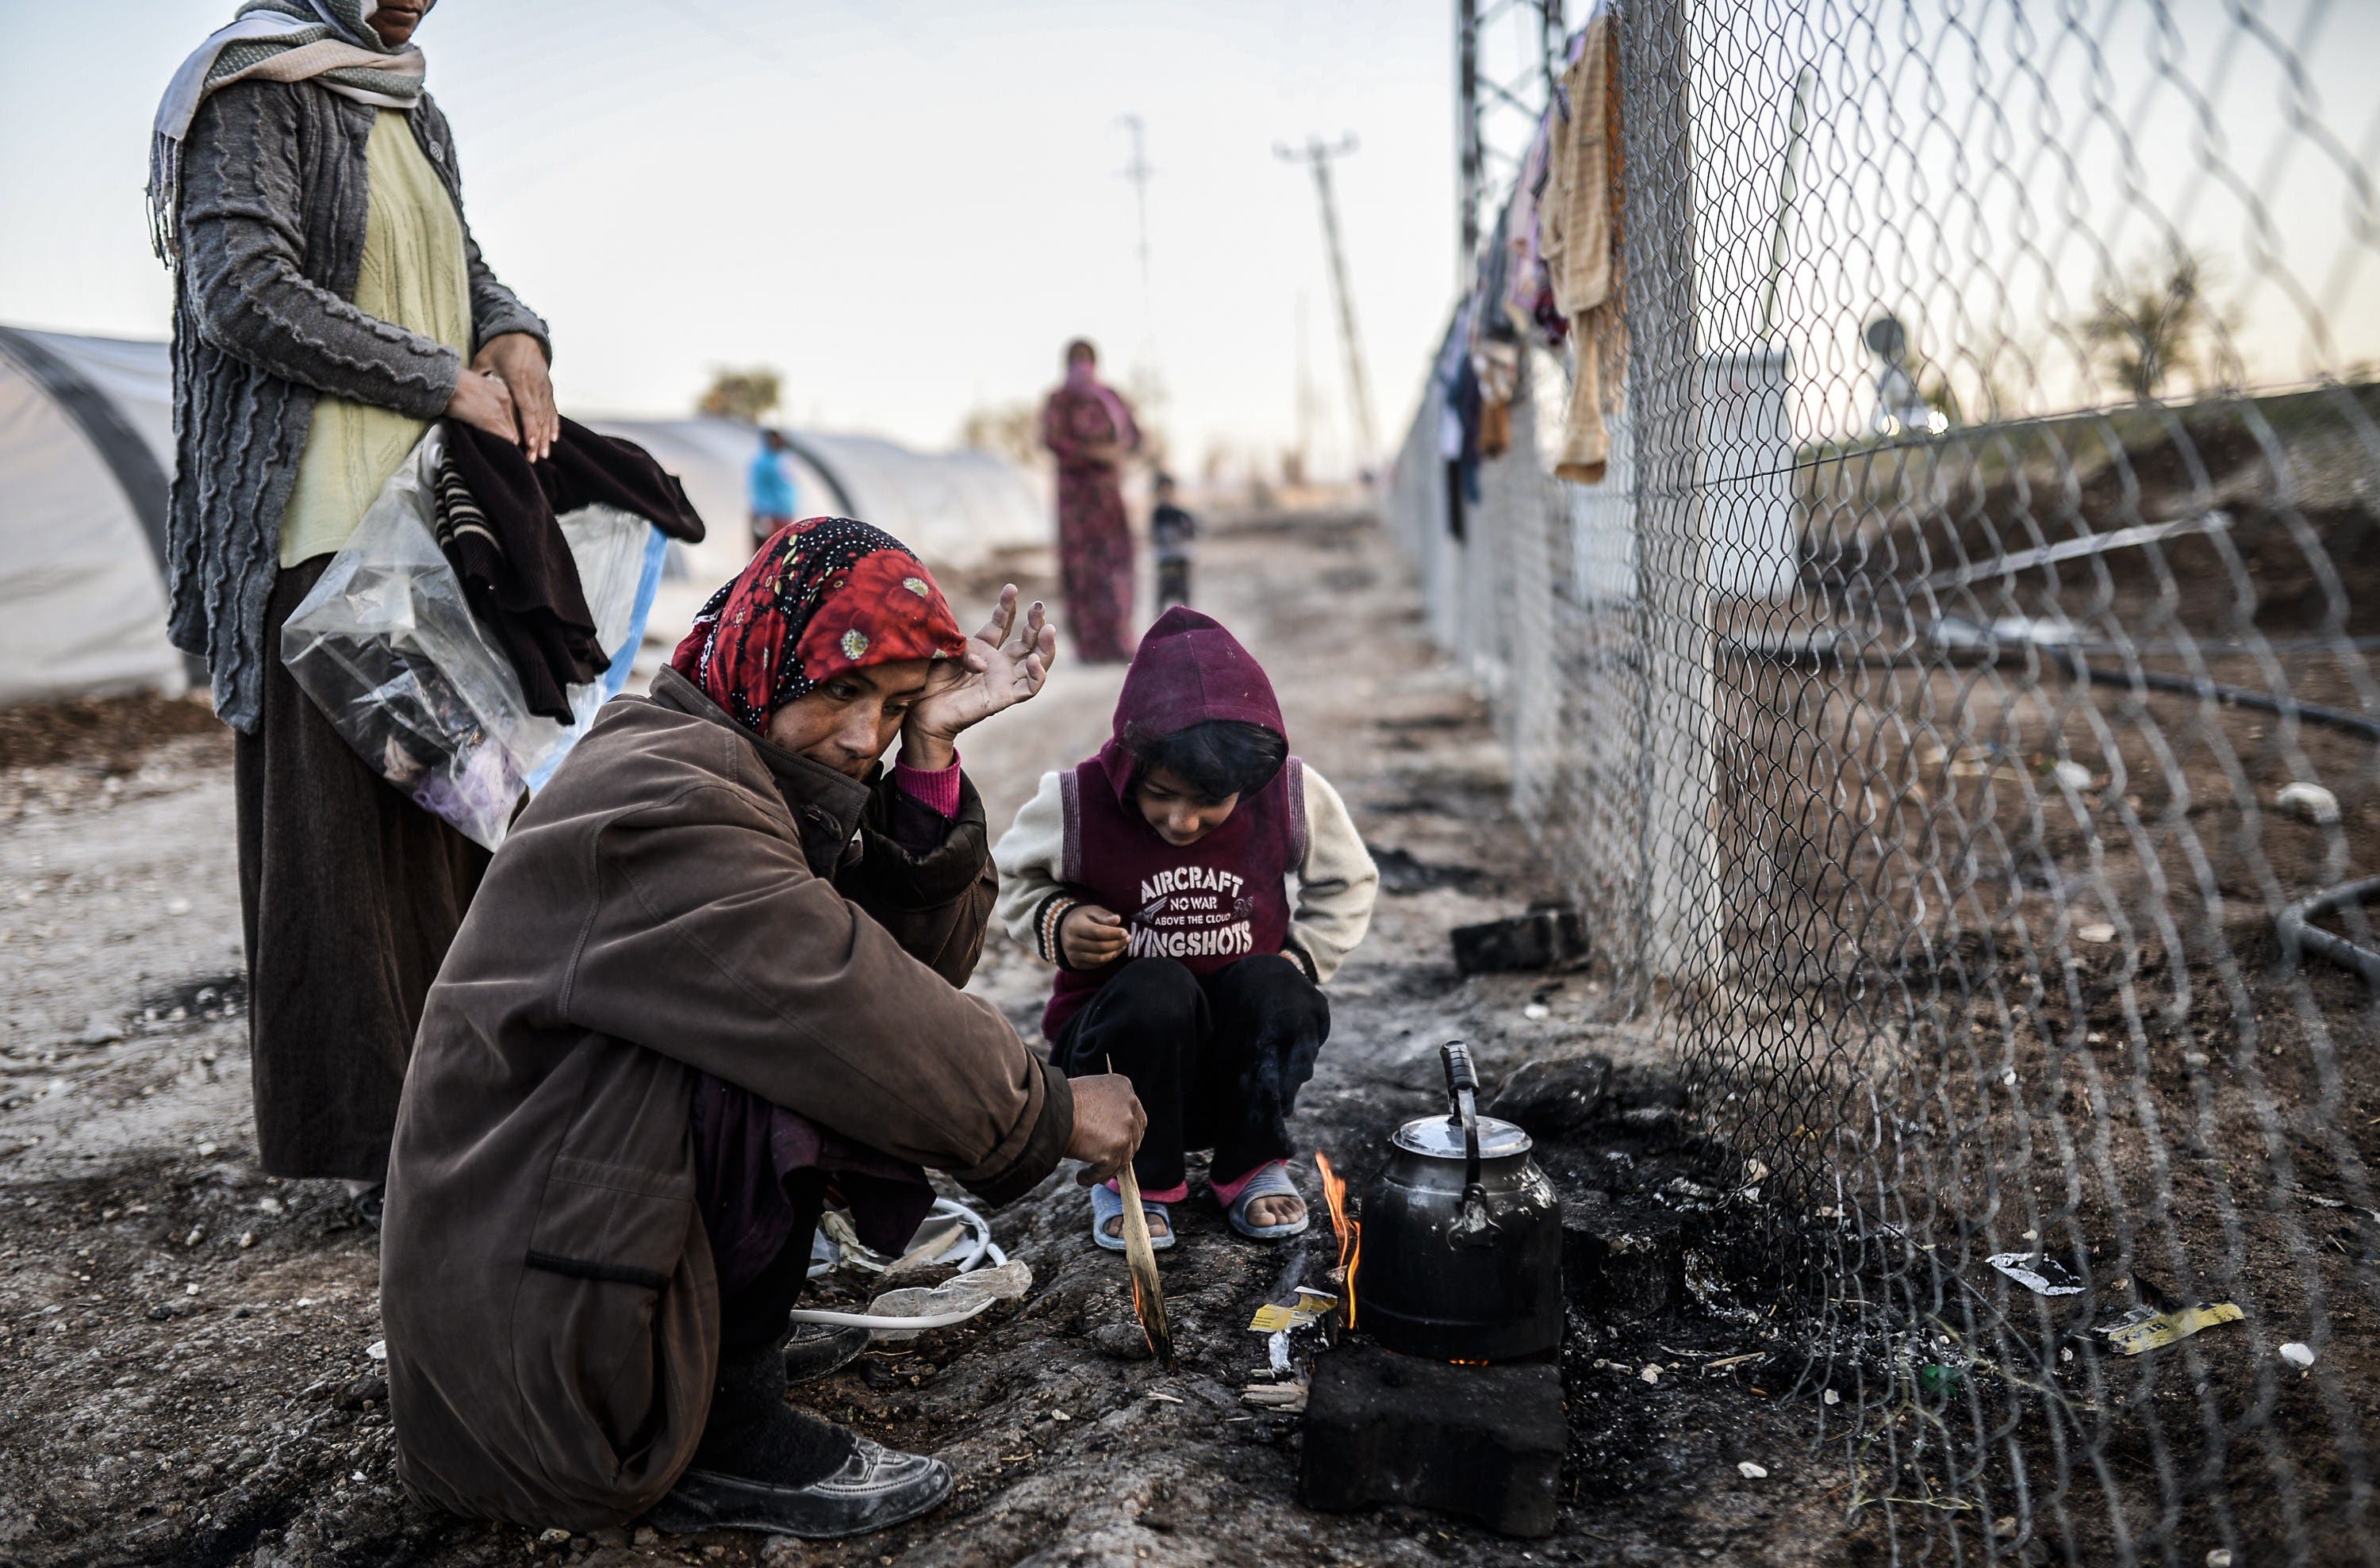 Kobane refugees on the run from ISIS